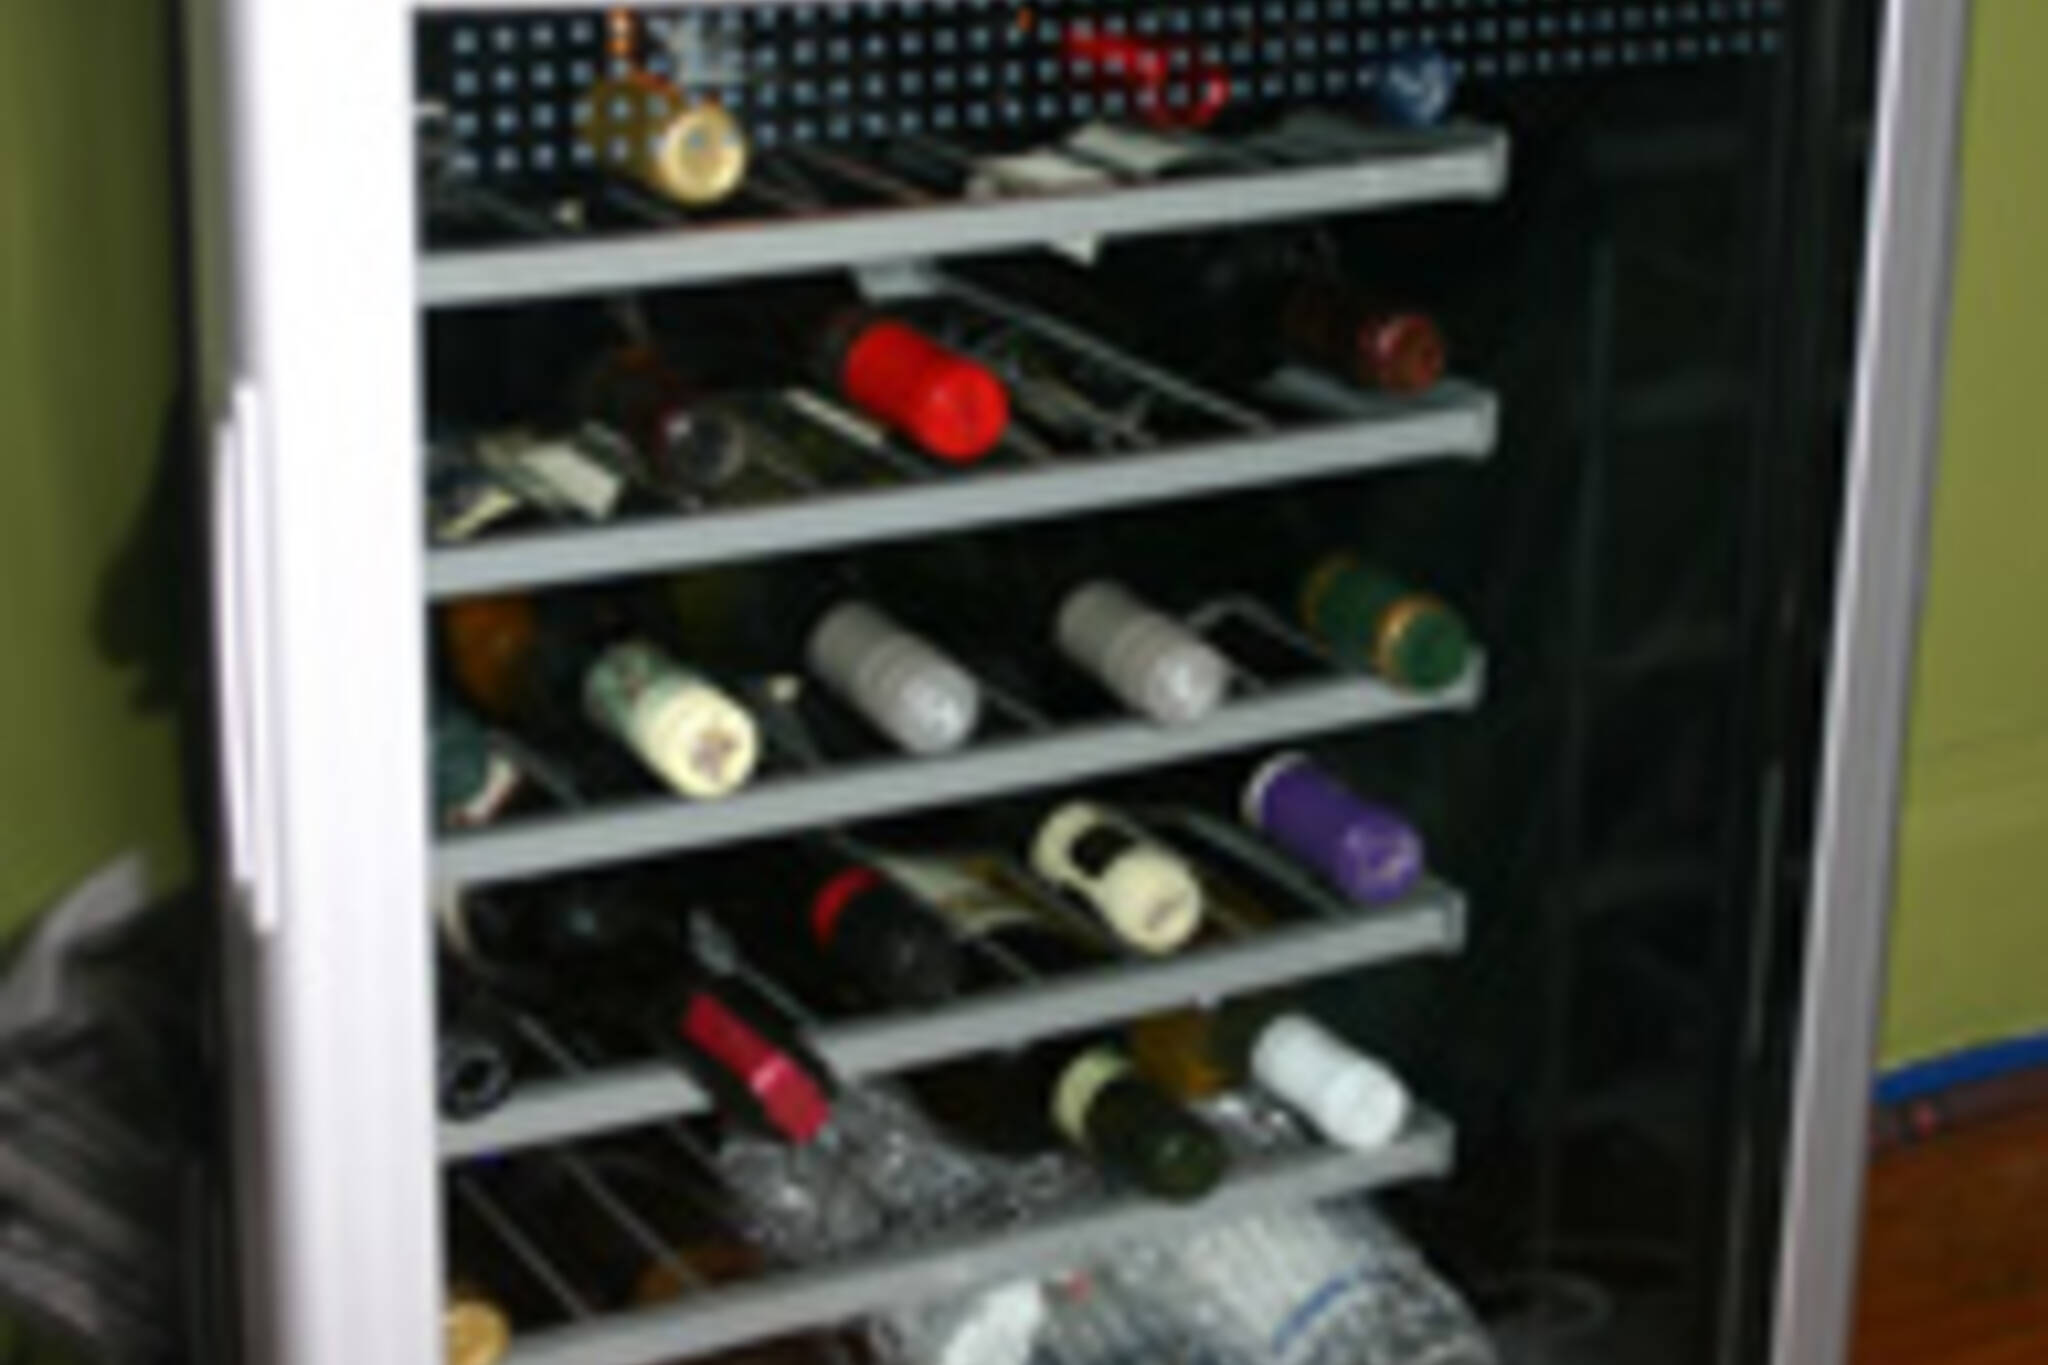 My new wine-fridge.  Now I can keep my bottles at optimum conditions.